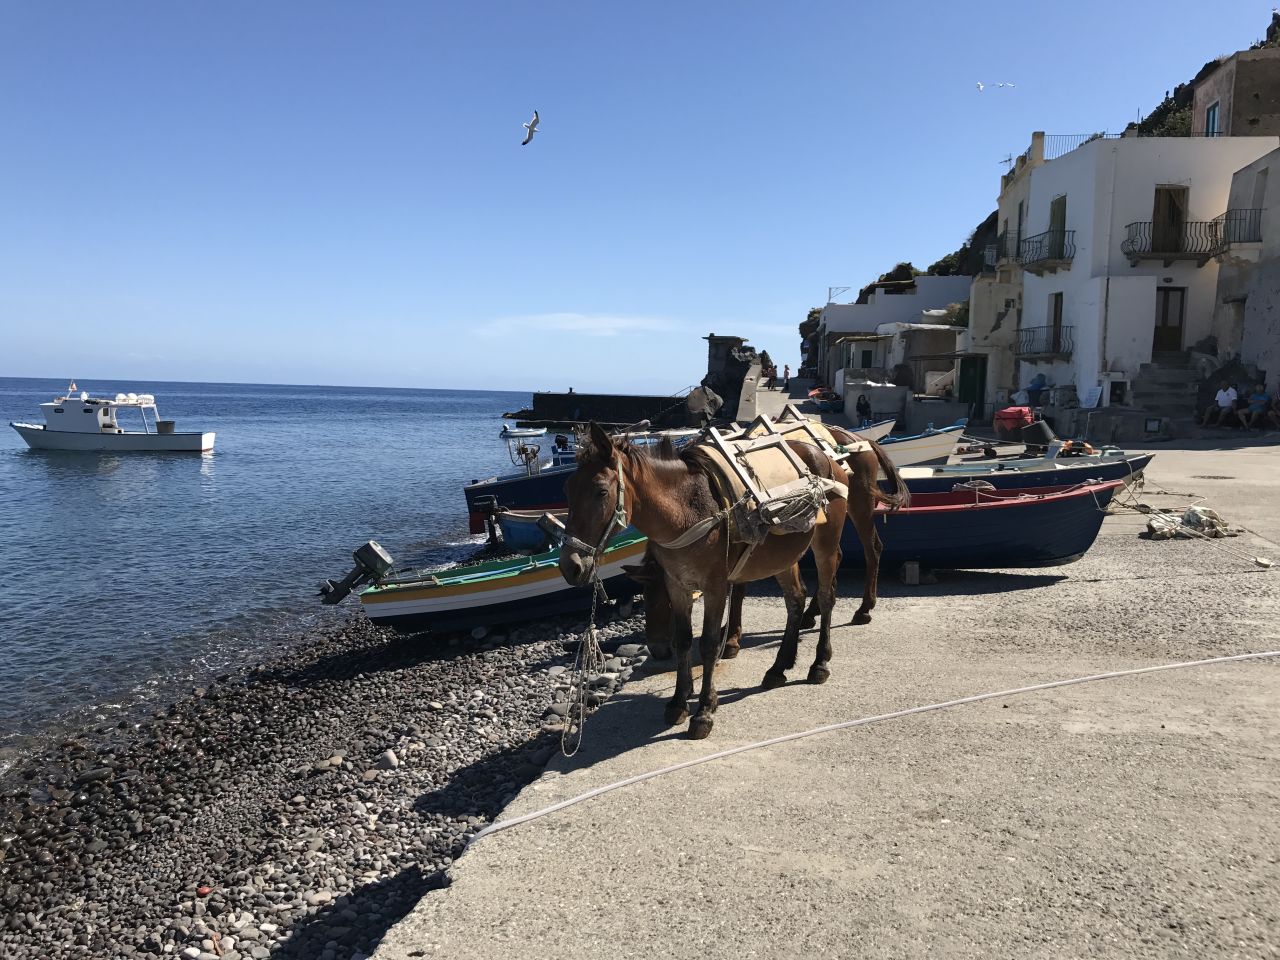 The beautiful island is home to donkeys who will assist with your luggage.